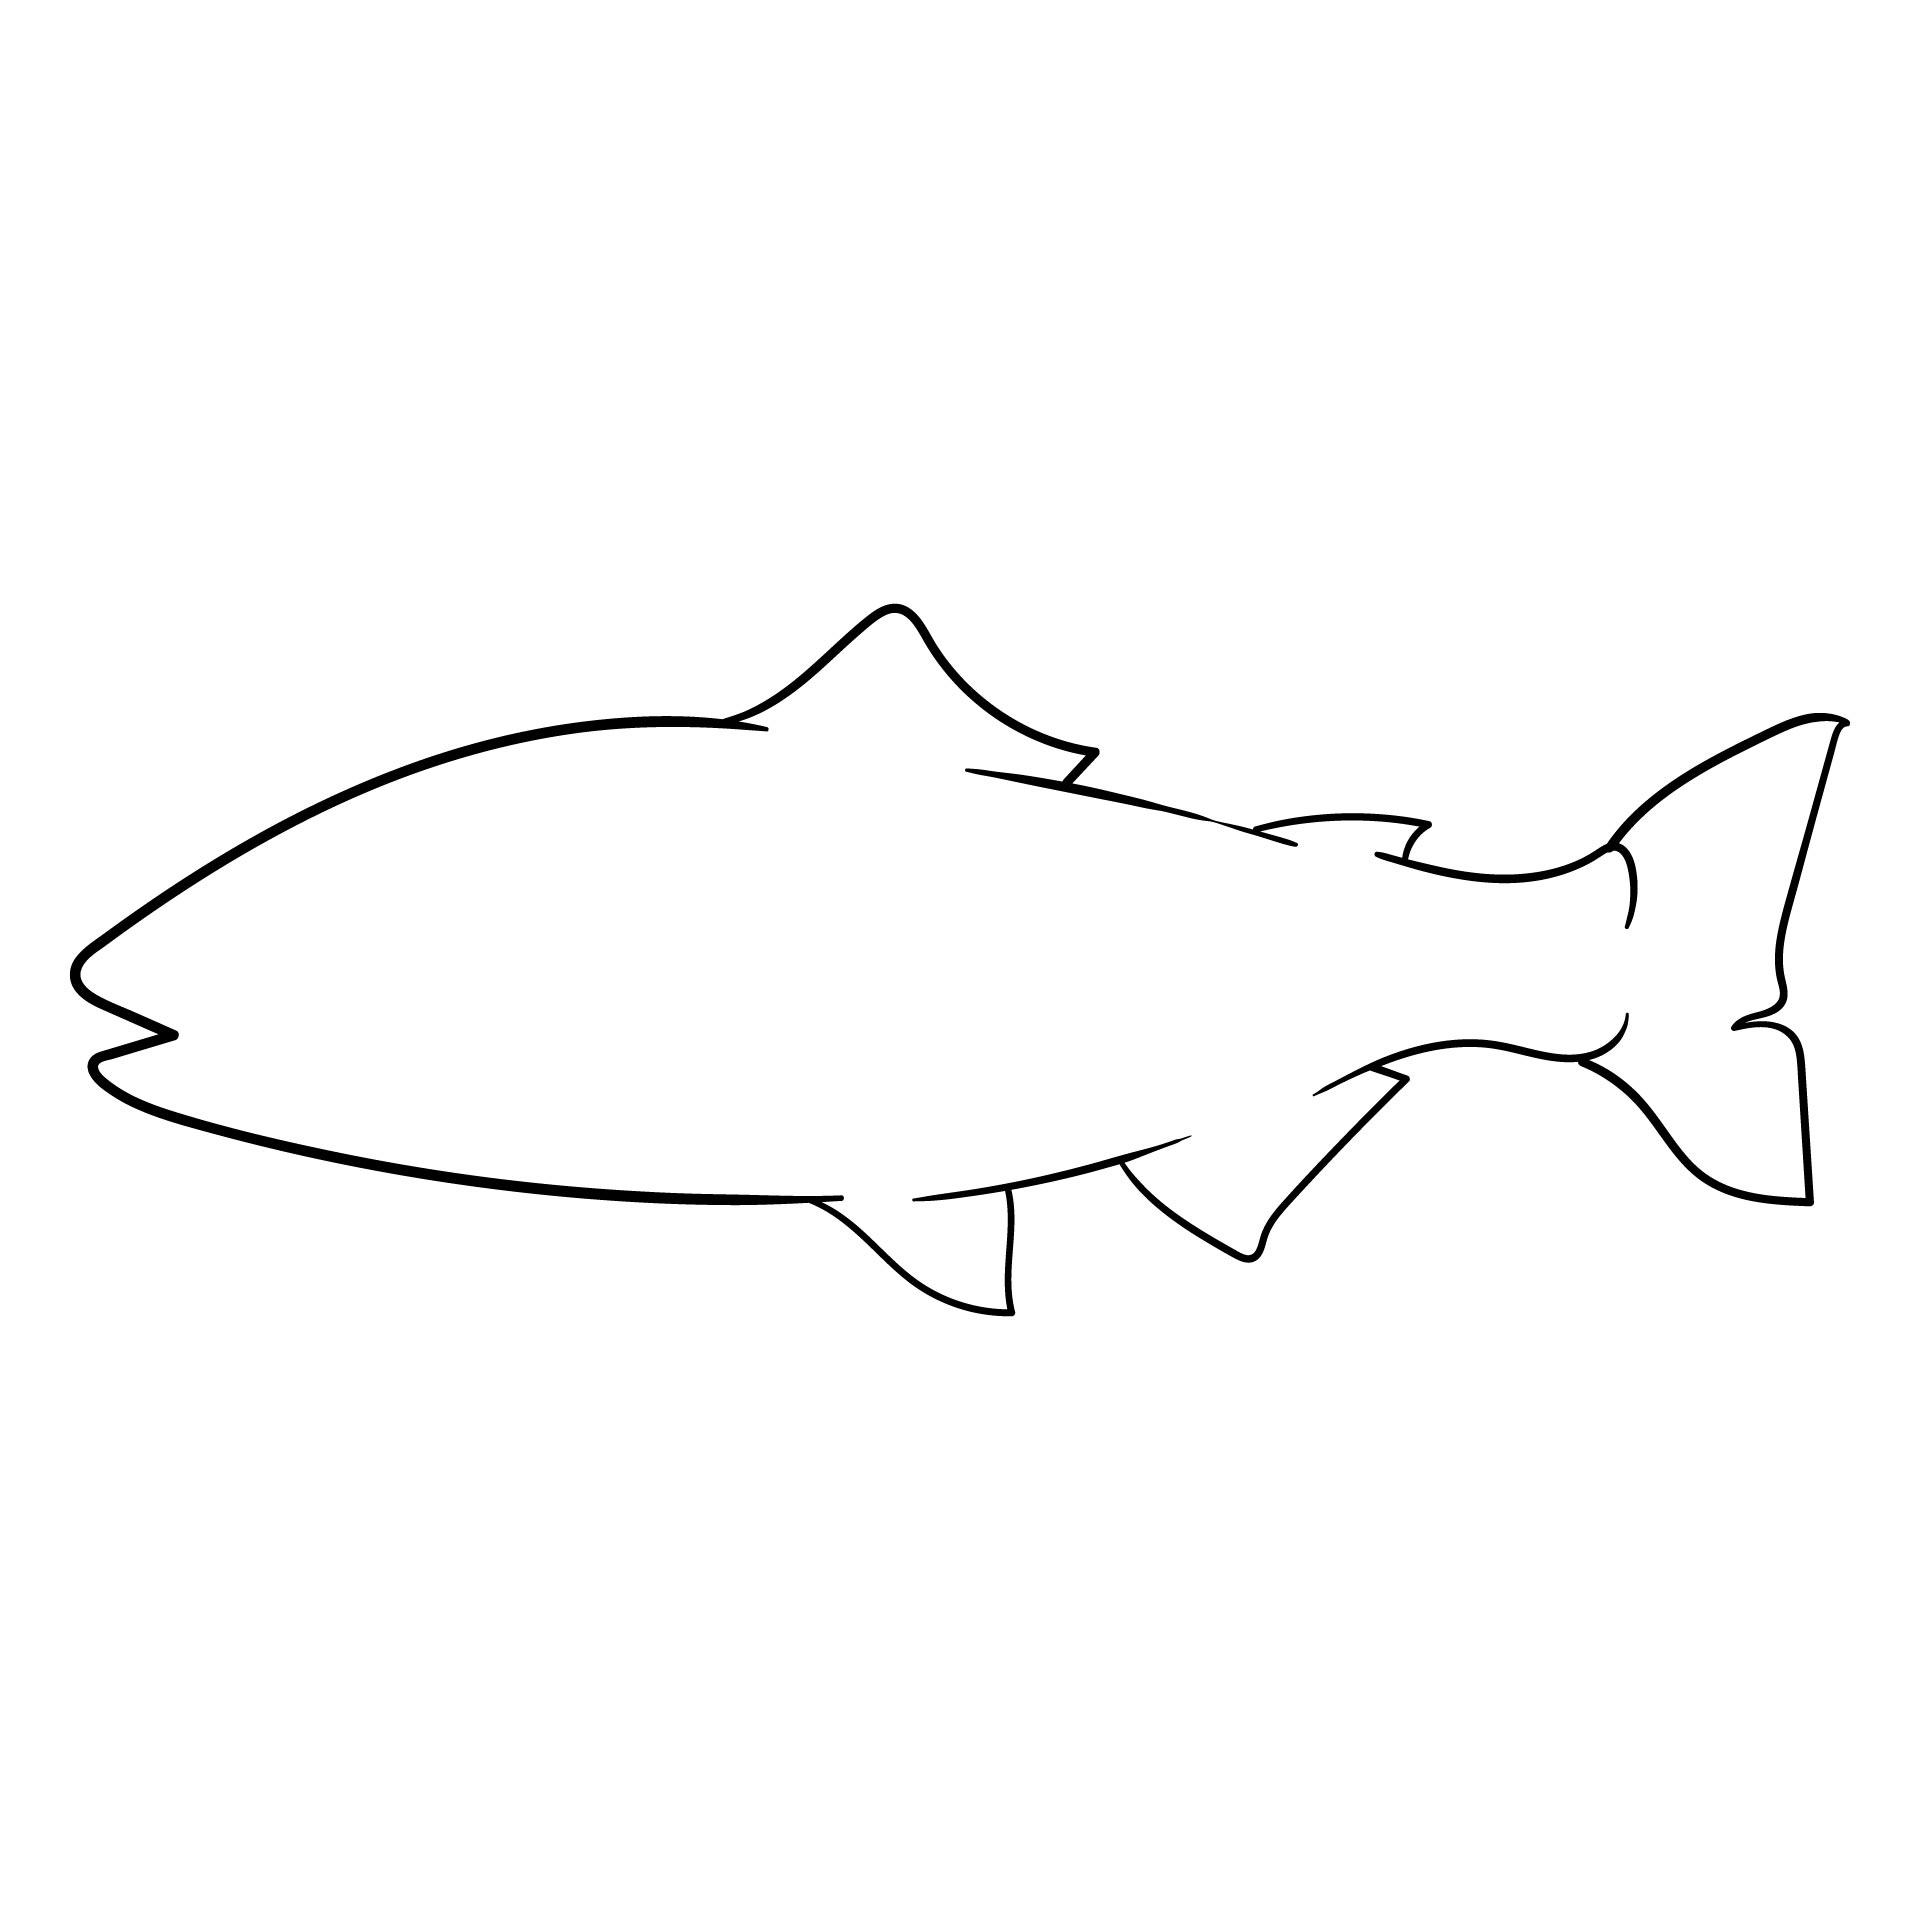 Printable Fish Cut Out Patterns